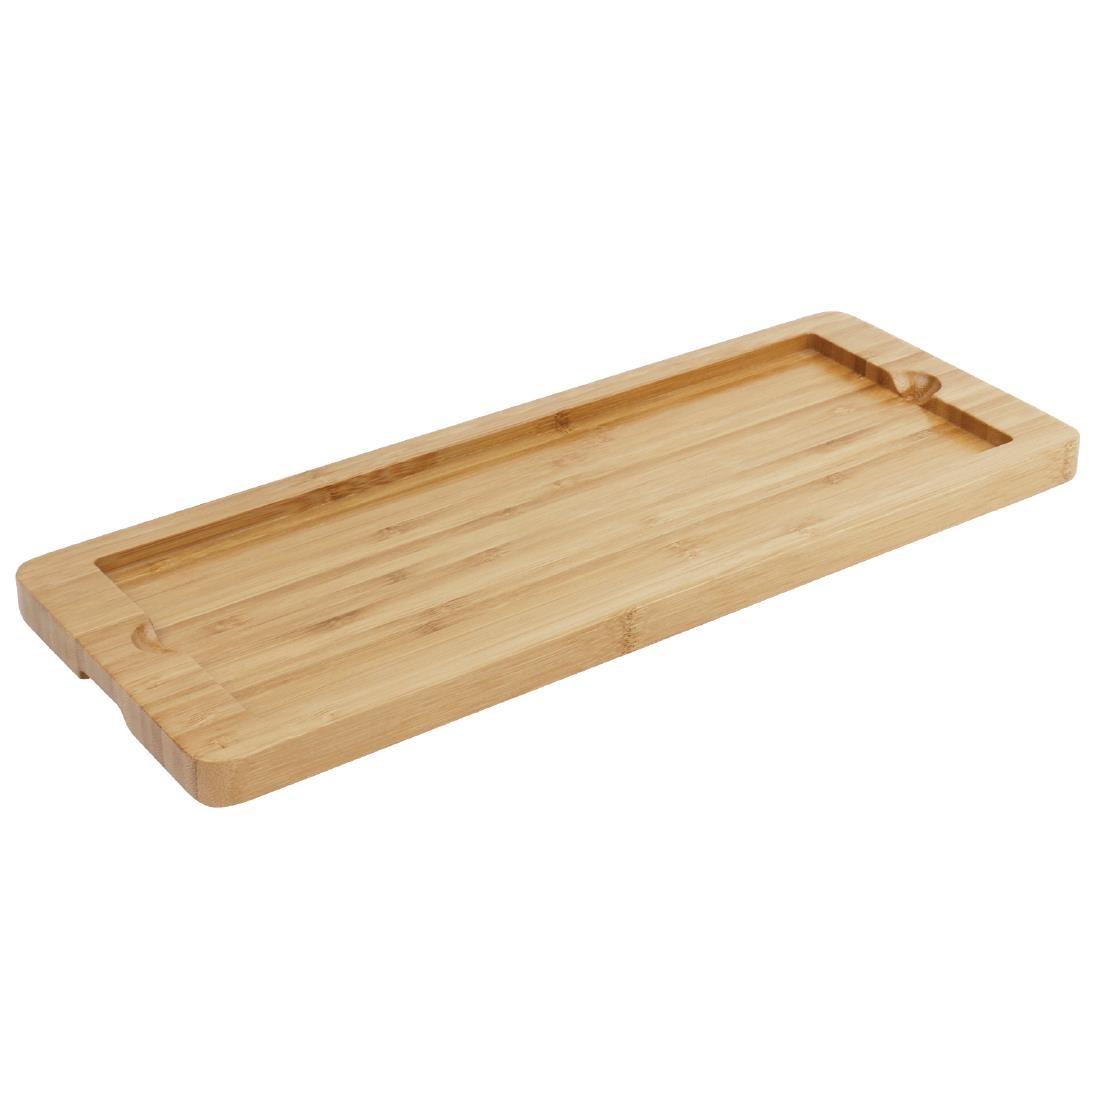 Olympia Wooden Base for Slate Platter 330 x 130mm - GM258  - 1